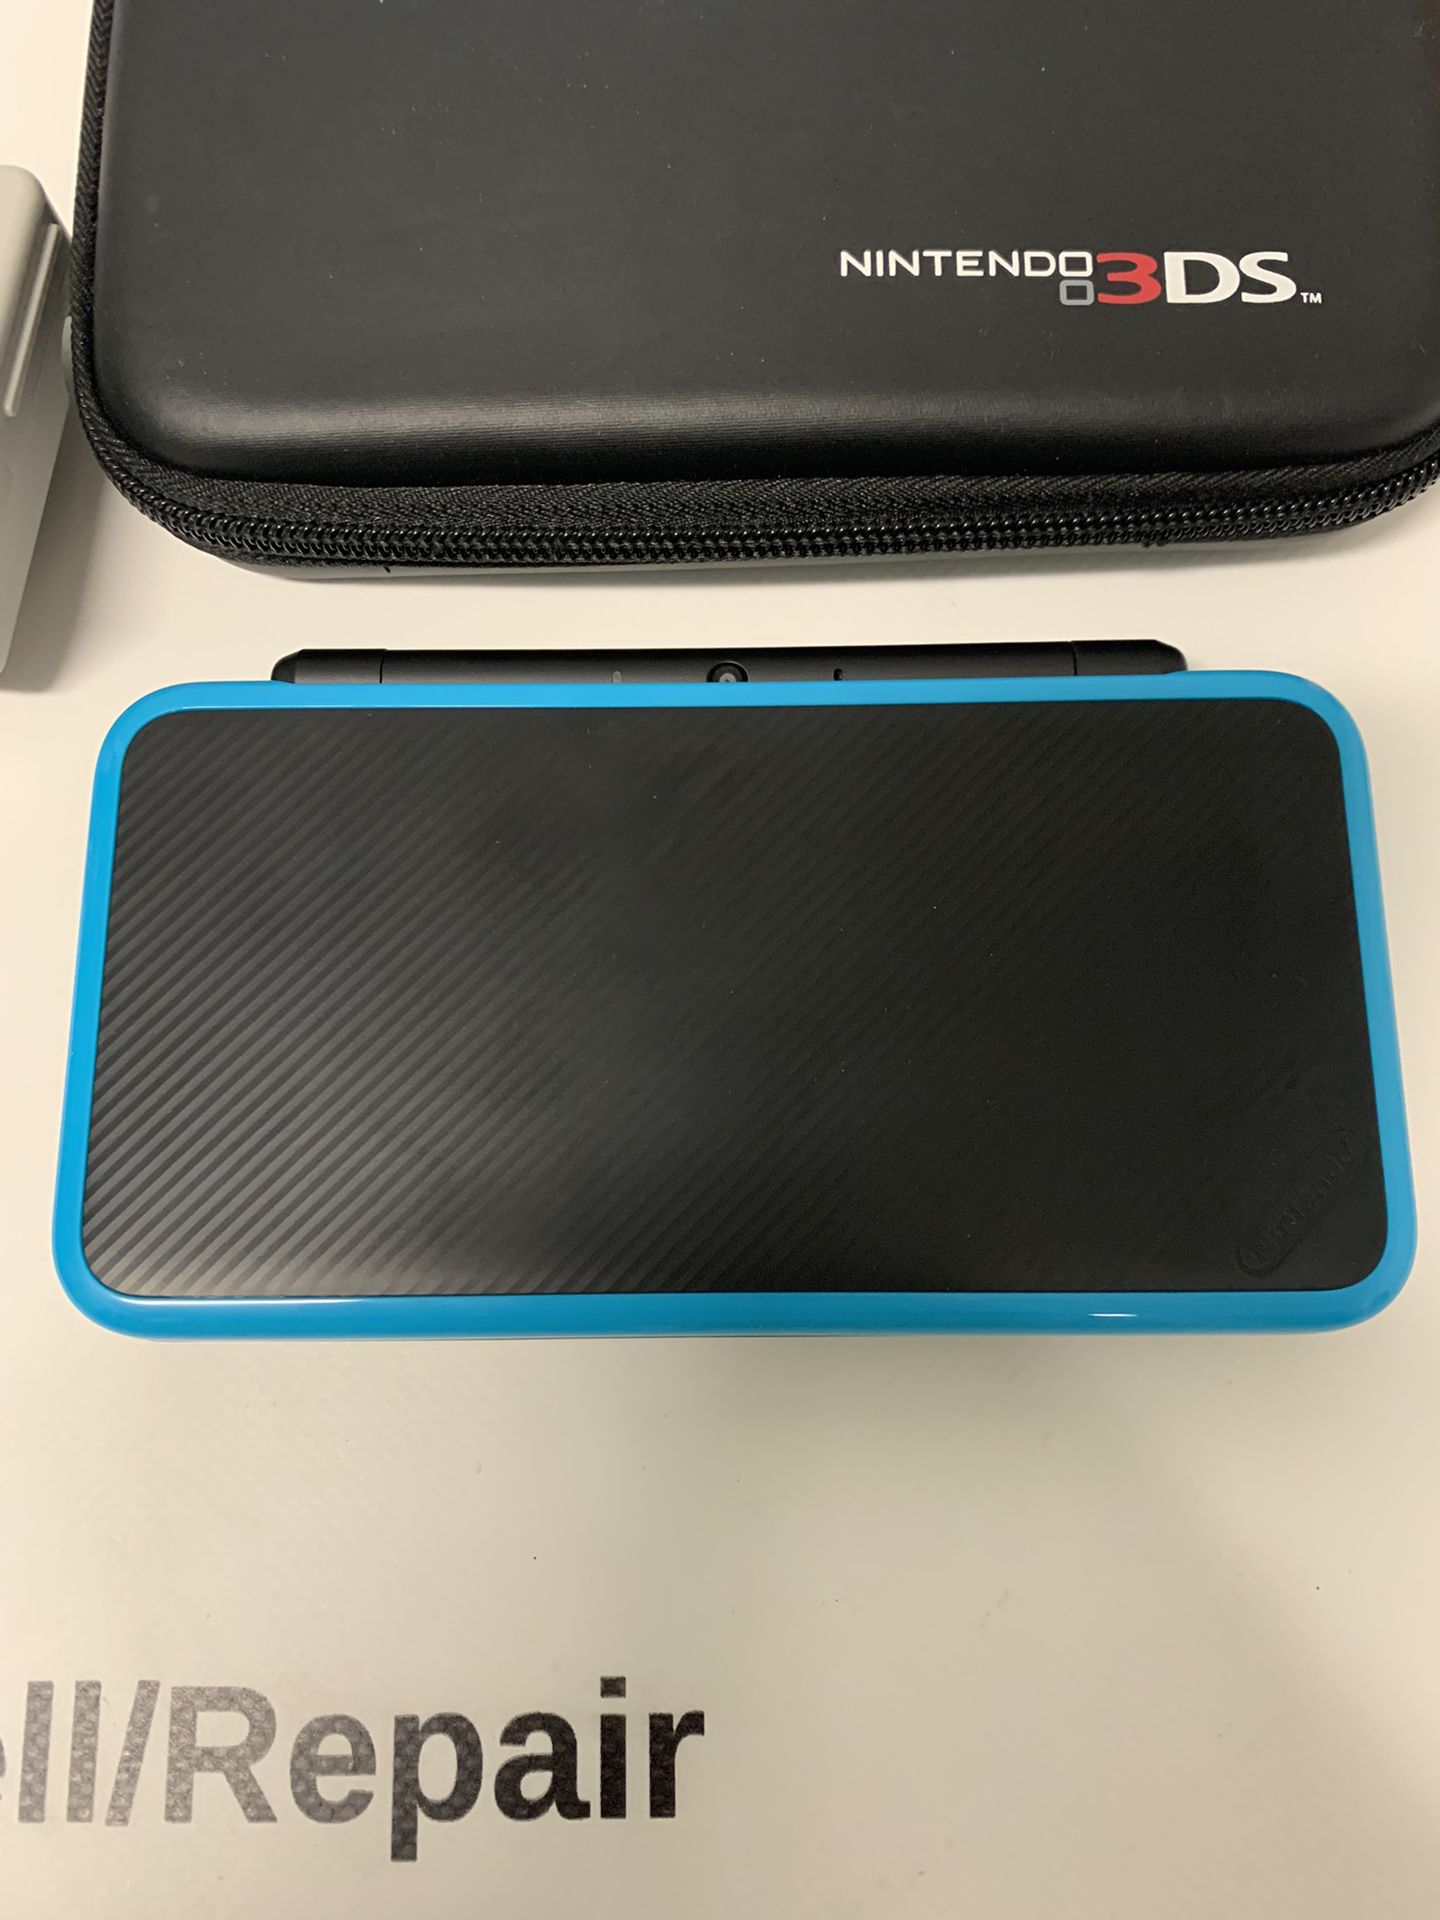 New 2ds XL - In Immaculate Condition - No Issues - For Sale/Trade